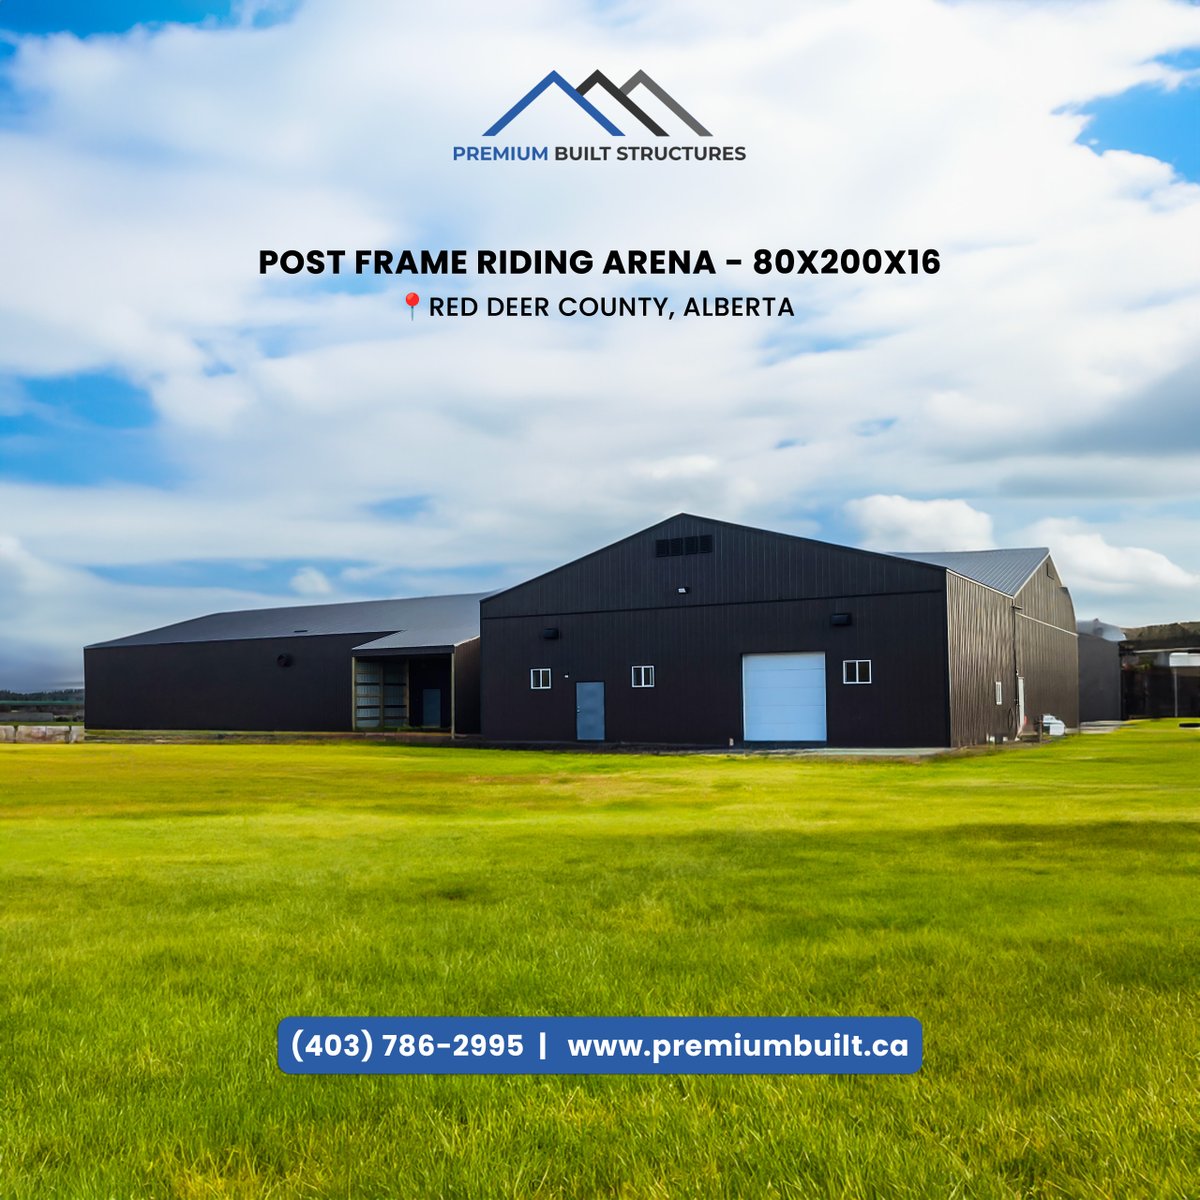 Check out this massive 80x200x16 riding arena with an additional 62x46x12 area that we built in Red Deer County, Alberta!  It has plenty of space and features needed for horse lovers to ride in comfort year-round.

#RidingArena #PostFrameBuilding #RedDeerCounty